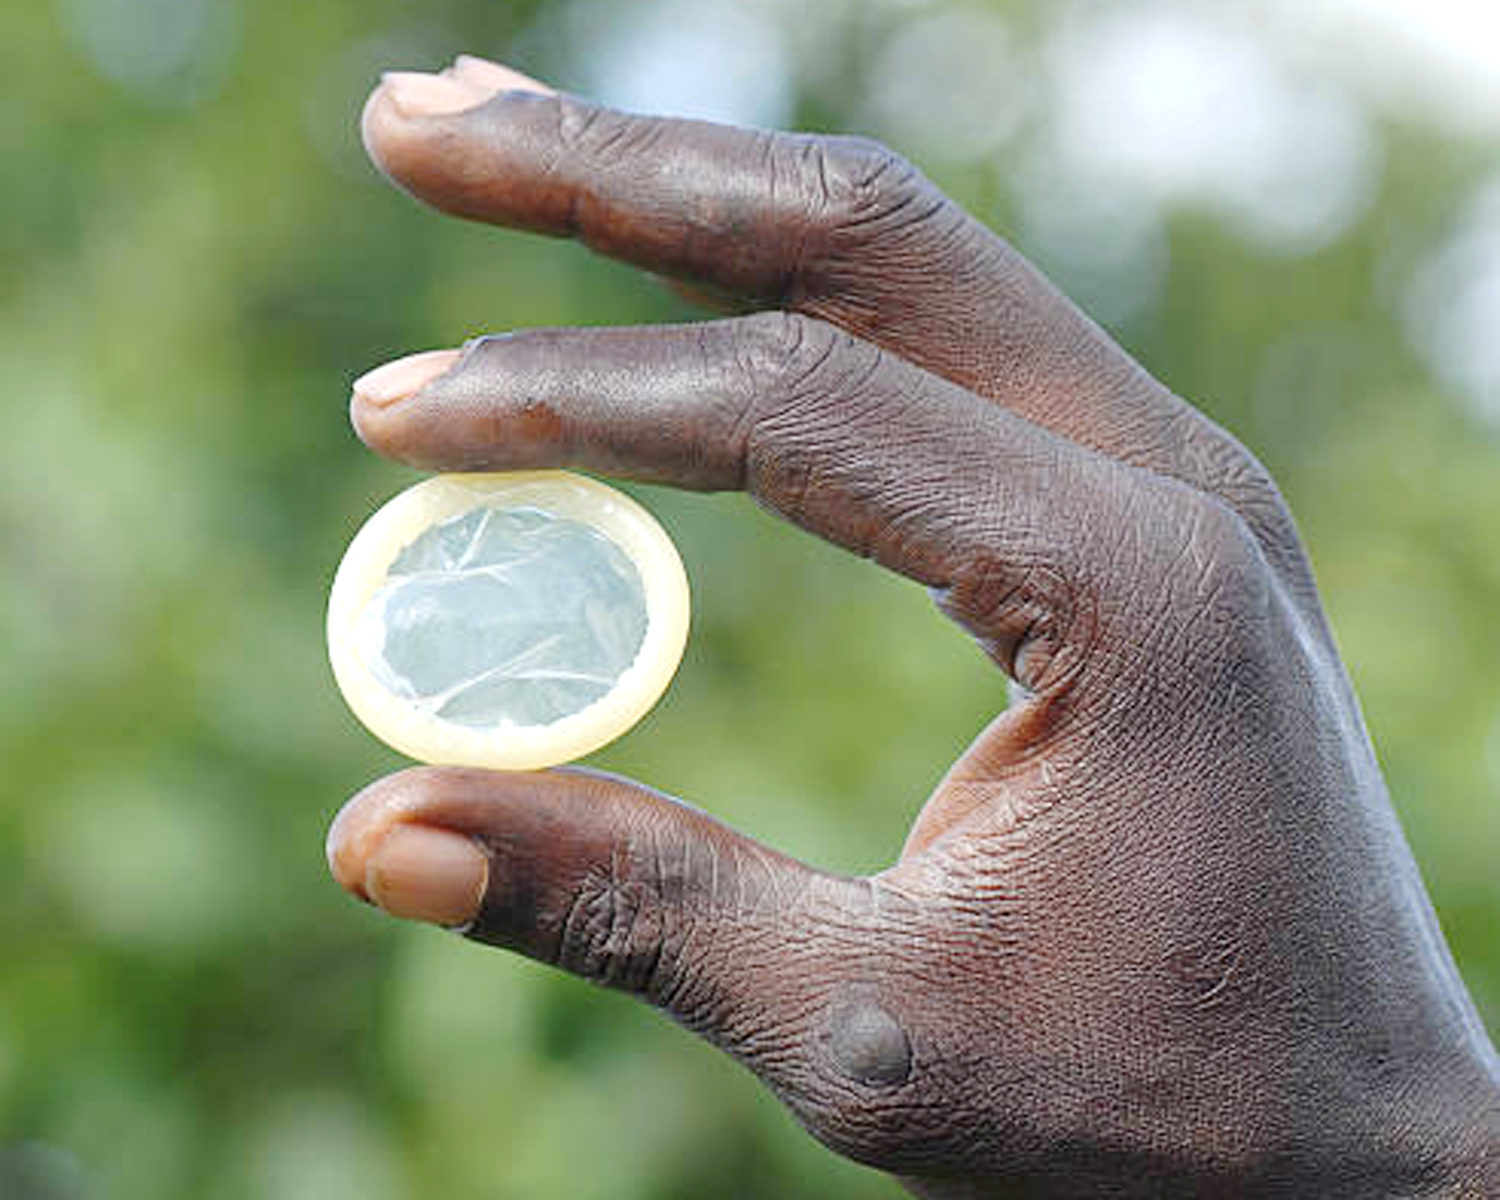 72% of Ugandan men dont know how to use condoms- survey